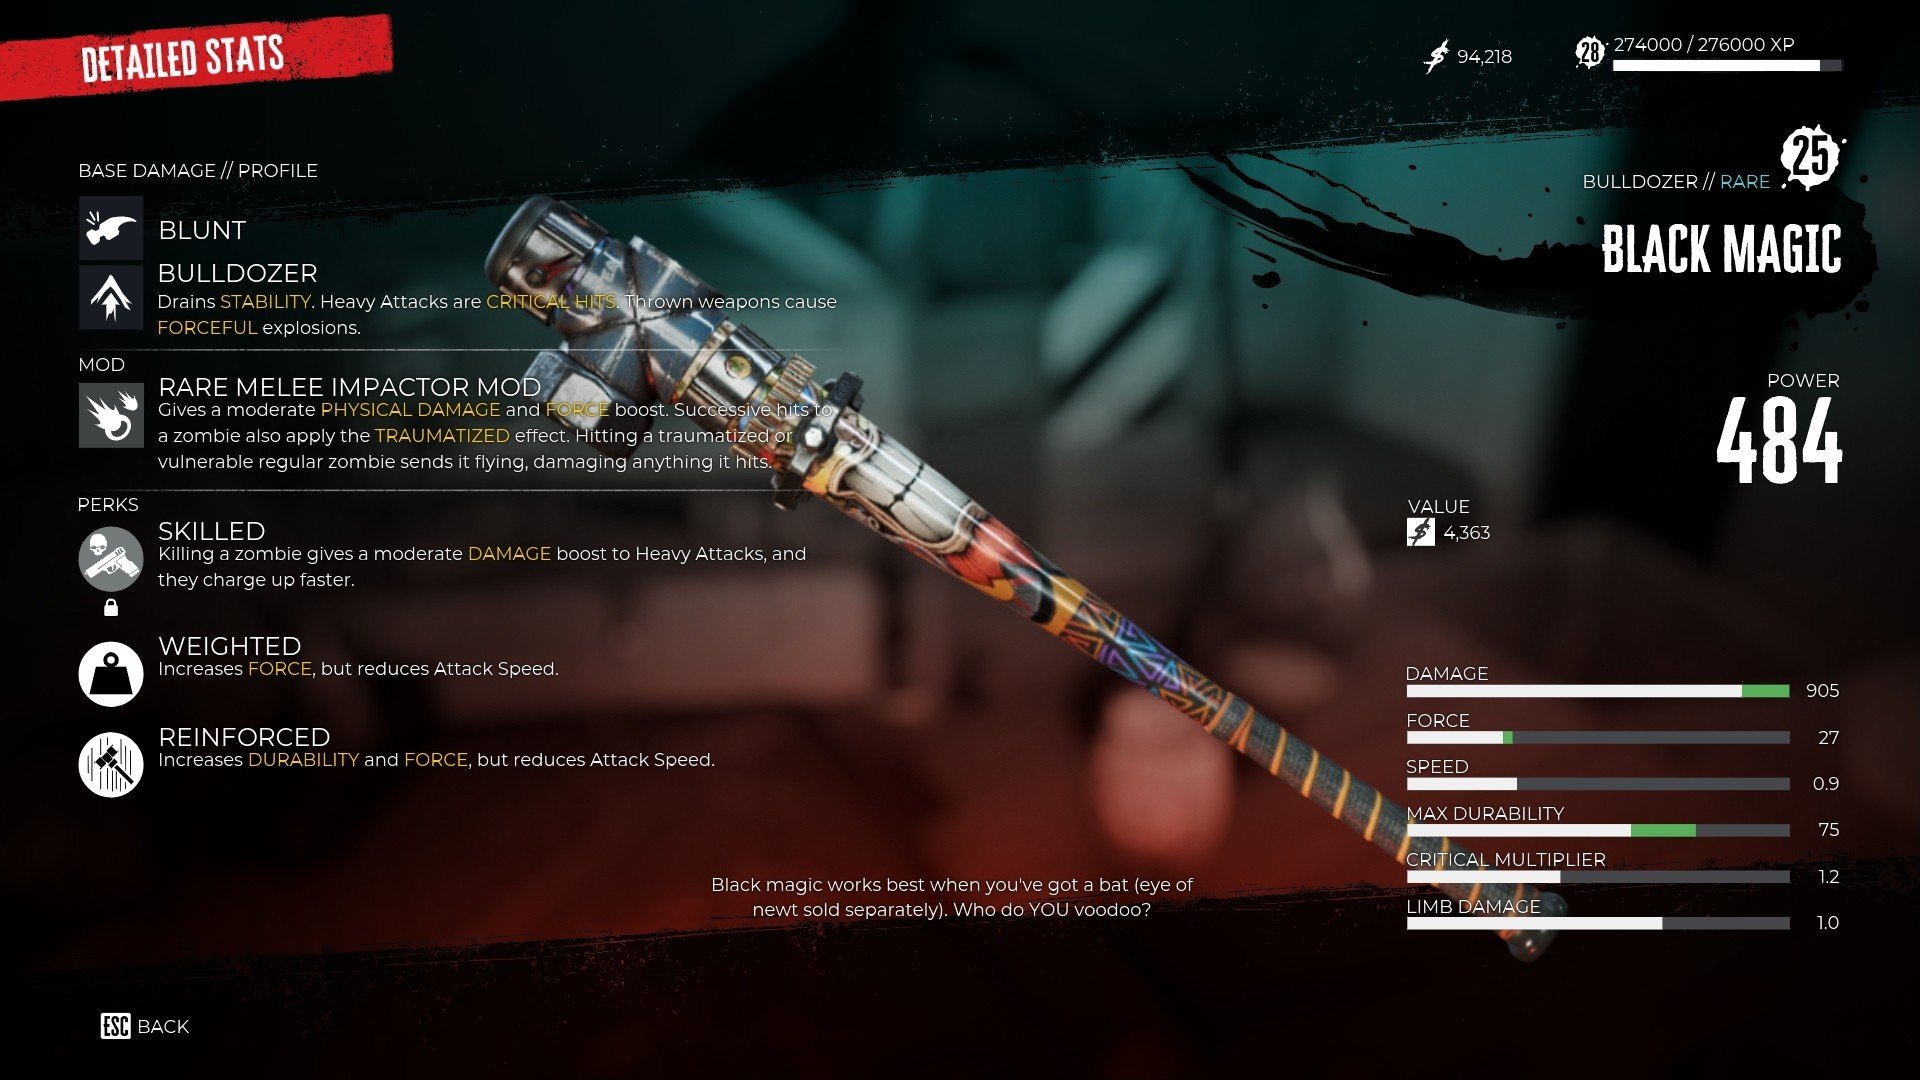 Dead Island 2 menu screenshot showing a baseball bat covered in colorful tattoo-style artwork as well as crude pipe-based modifications. The bat is surrounded by boxes containing statistical information about the weapon's properties. 